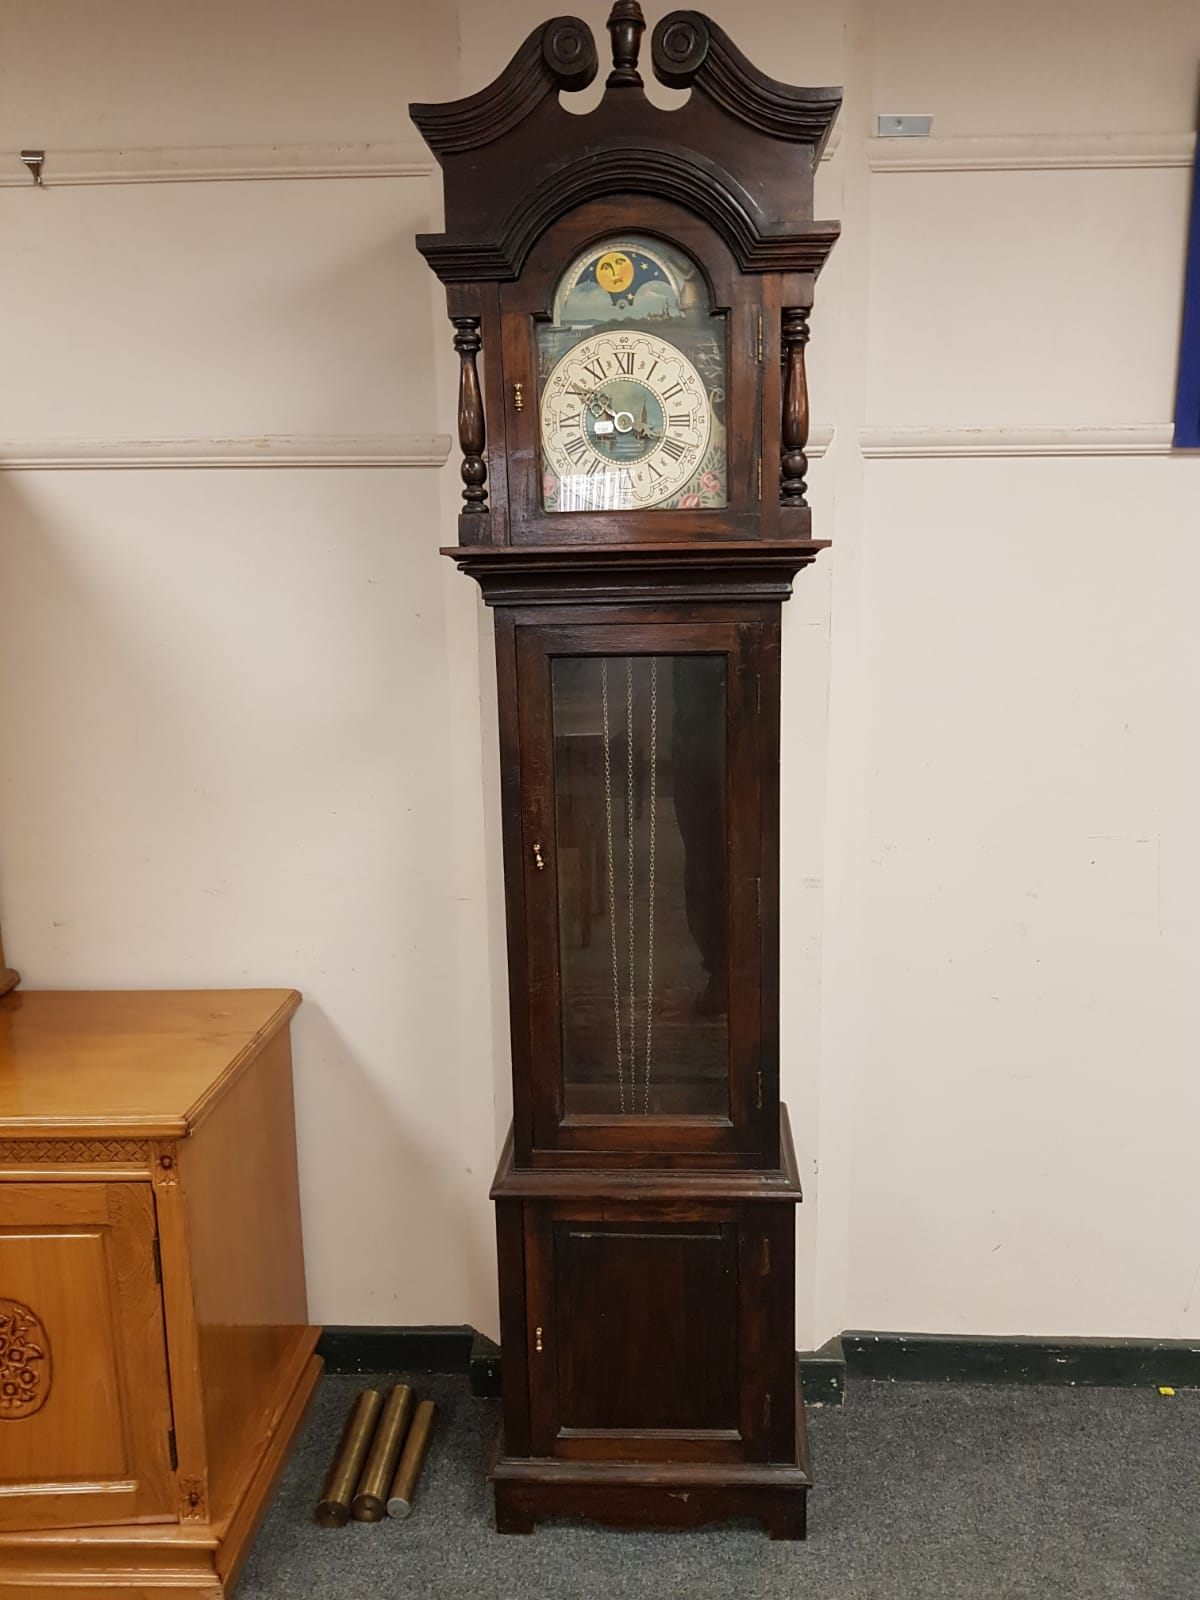 A 20th century stained pine longcase clock with moonphase dial,